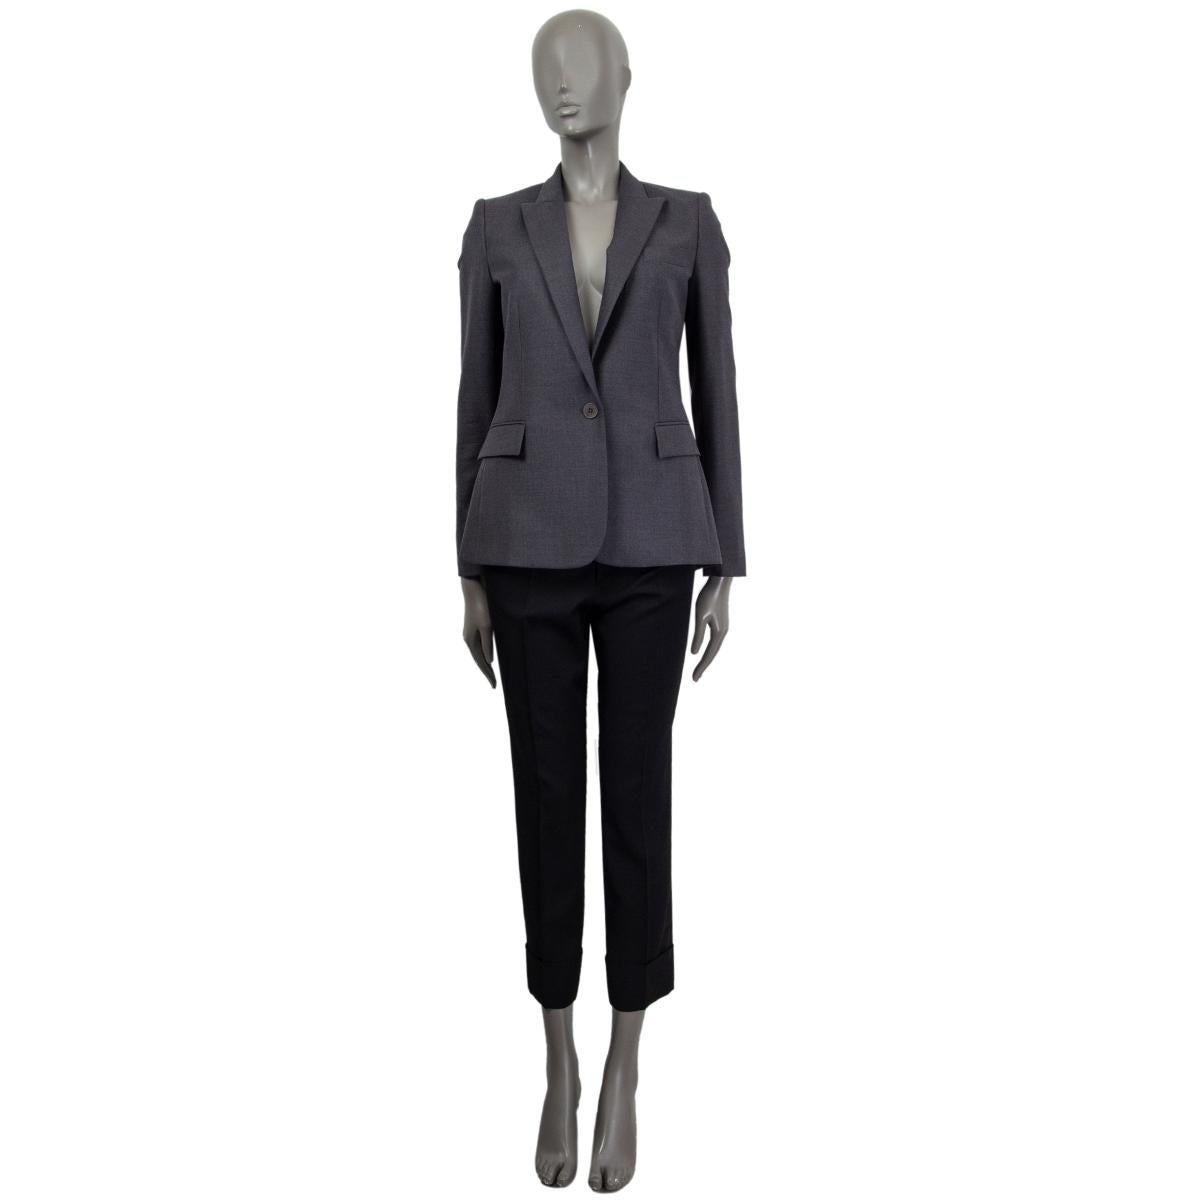 100% authentic Stella McCartney fitted one-button blazer in charcoal wool (100%) and lined in black viscose (52%) and cotton (48%). Sleeve lining is viscose (100%). Has been worn and is in excellent condition.

Measurements
Tag